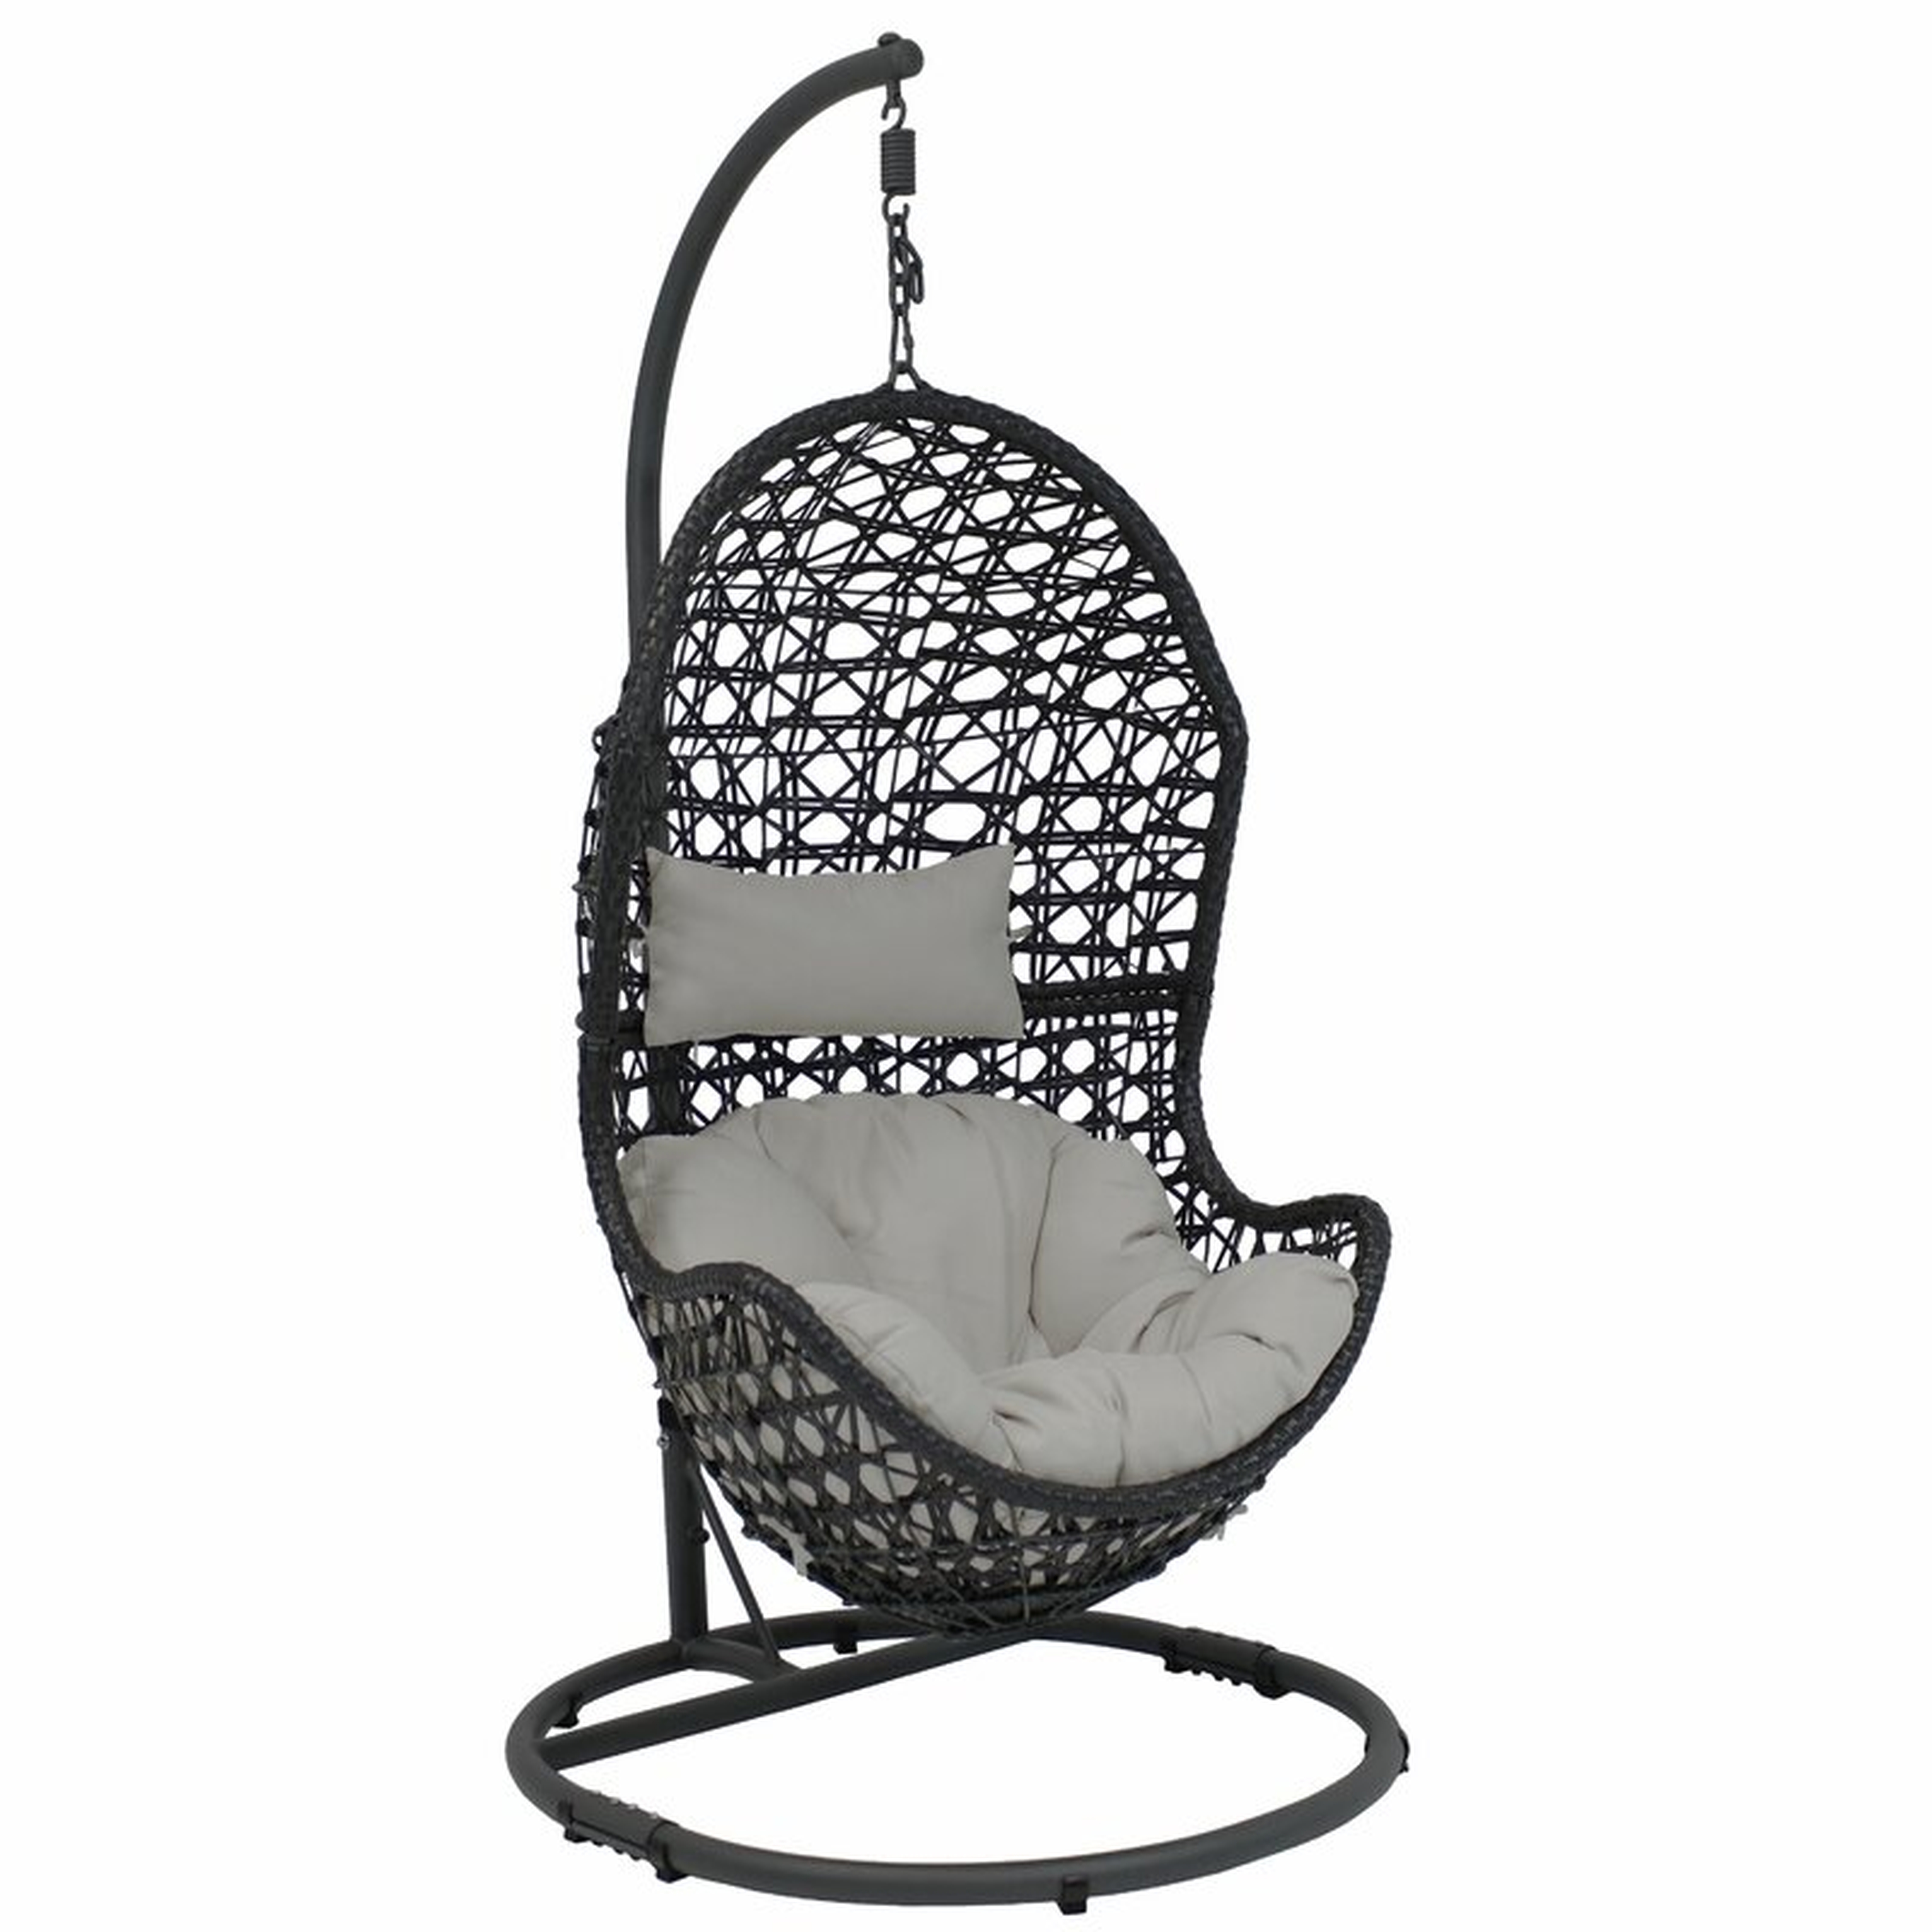 Abrams Hanging Egg Chair Hammock with Stand - Wayfair